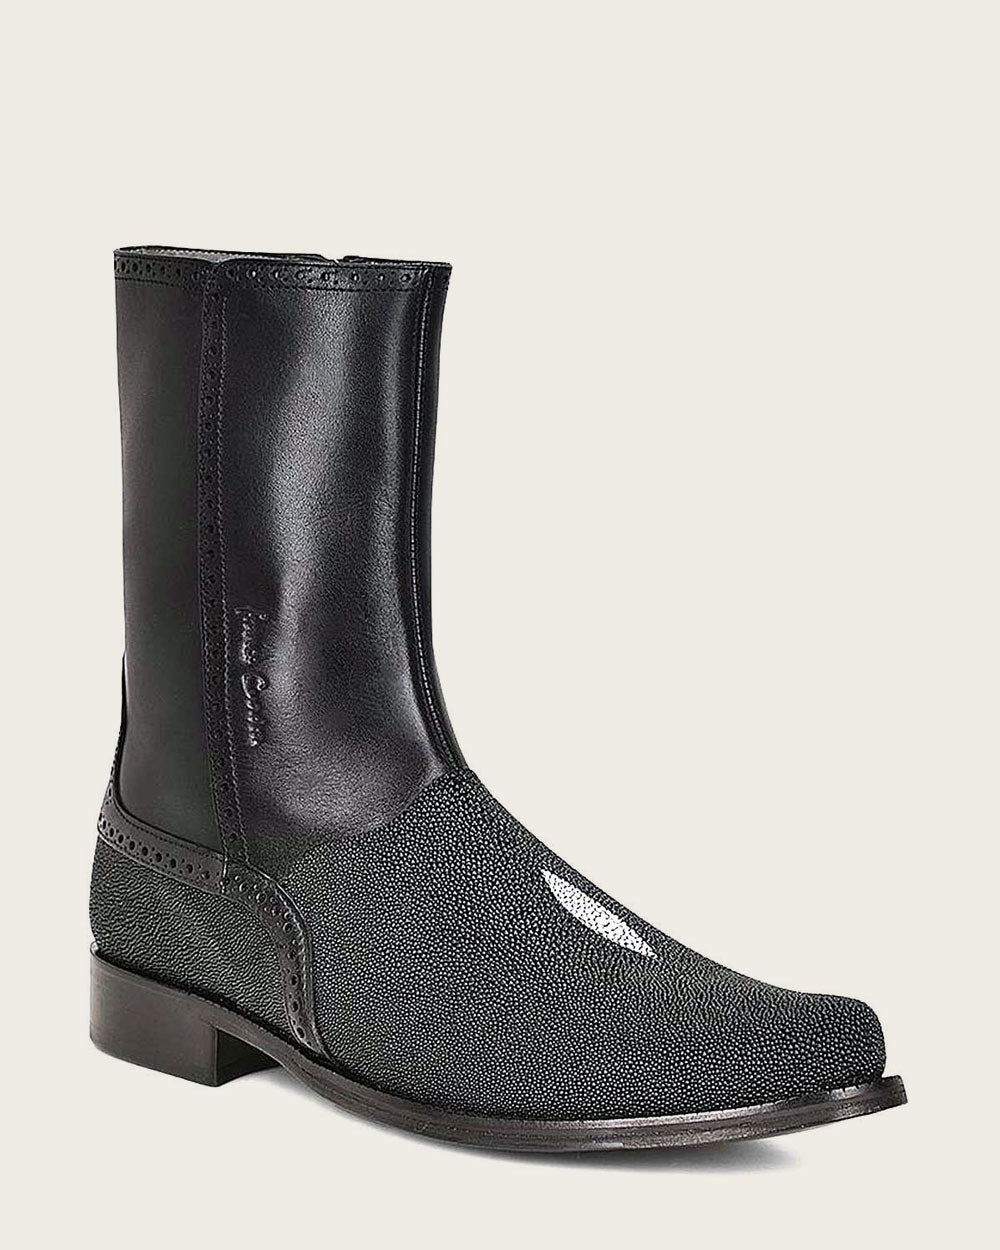 Black Cuadra Boots: Stingray & bovine leather for unmatched style & durability. 